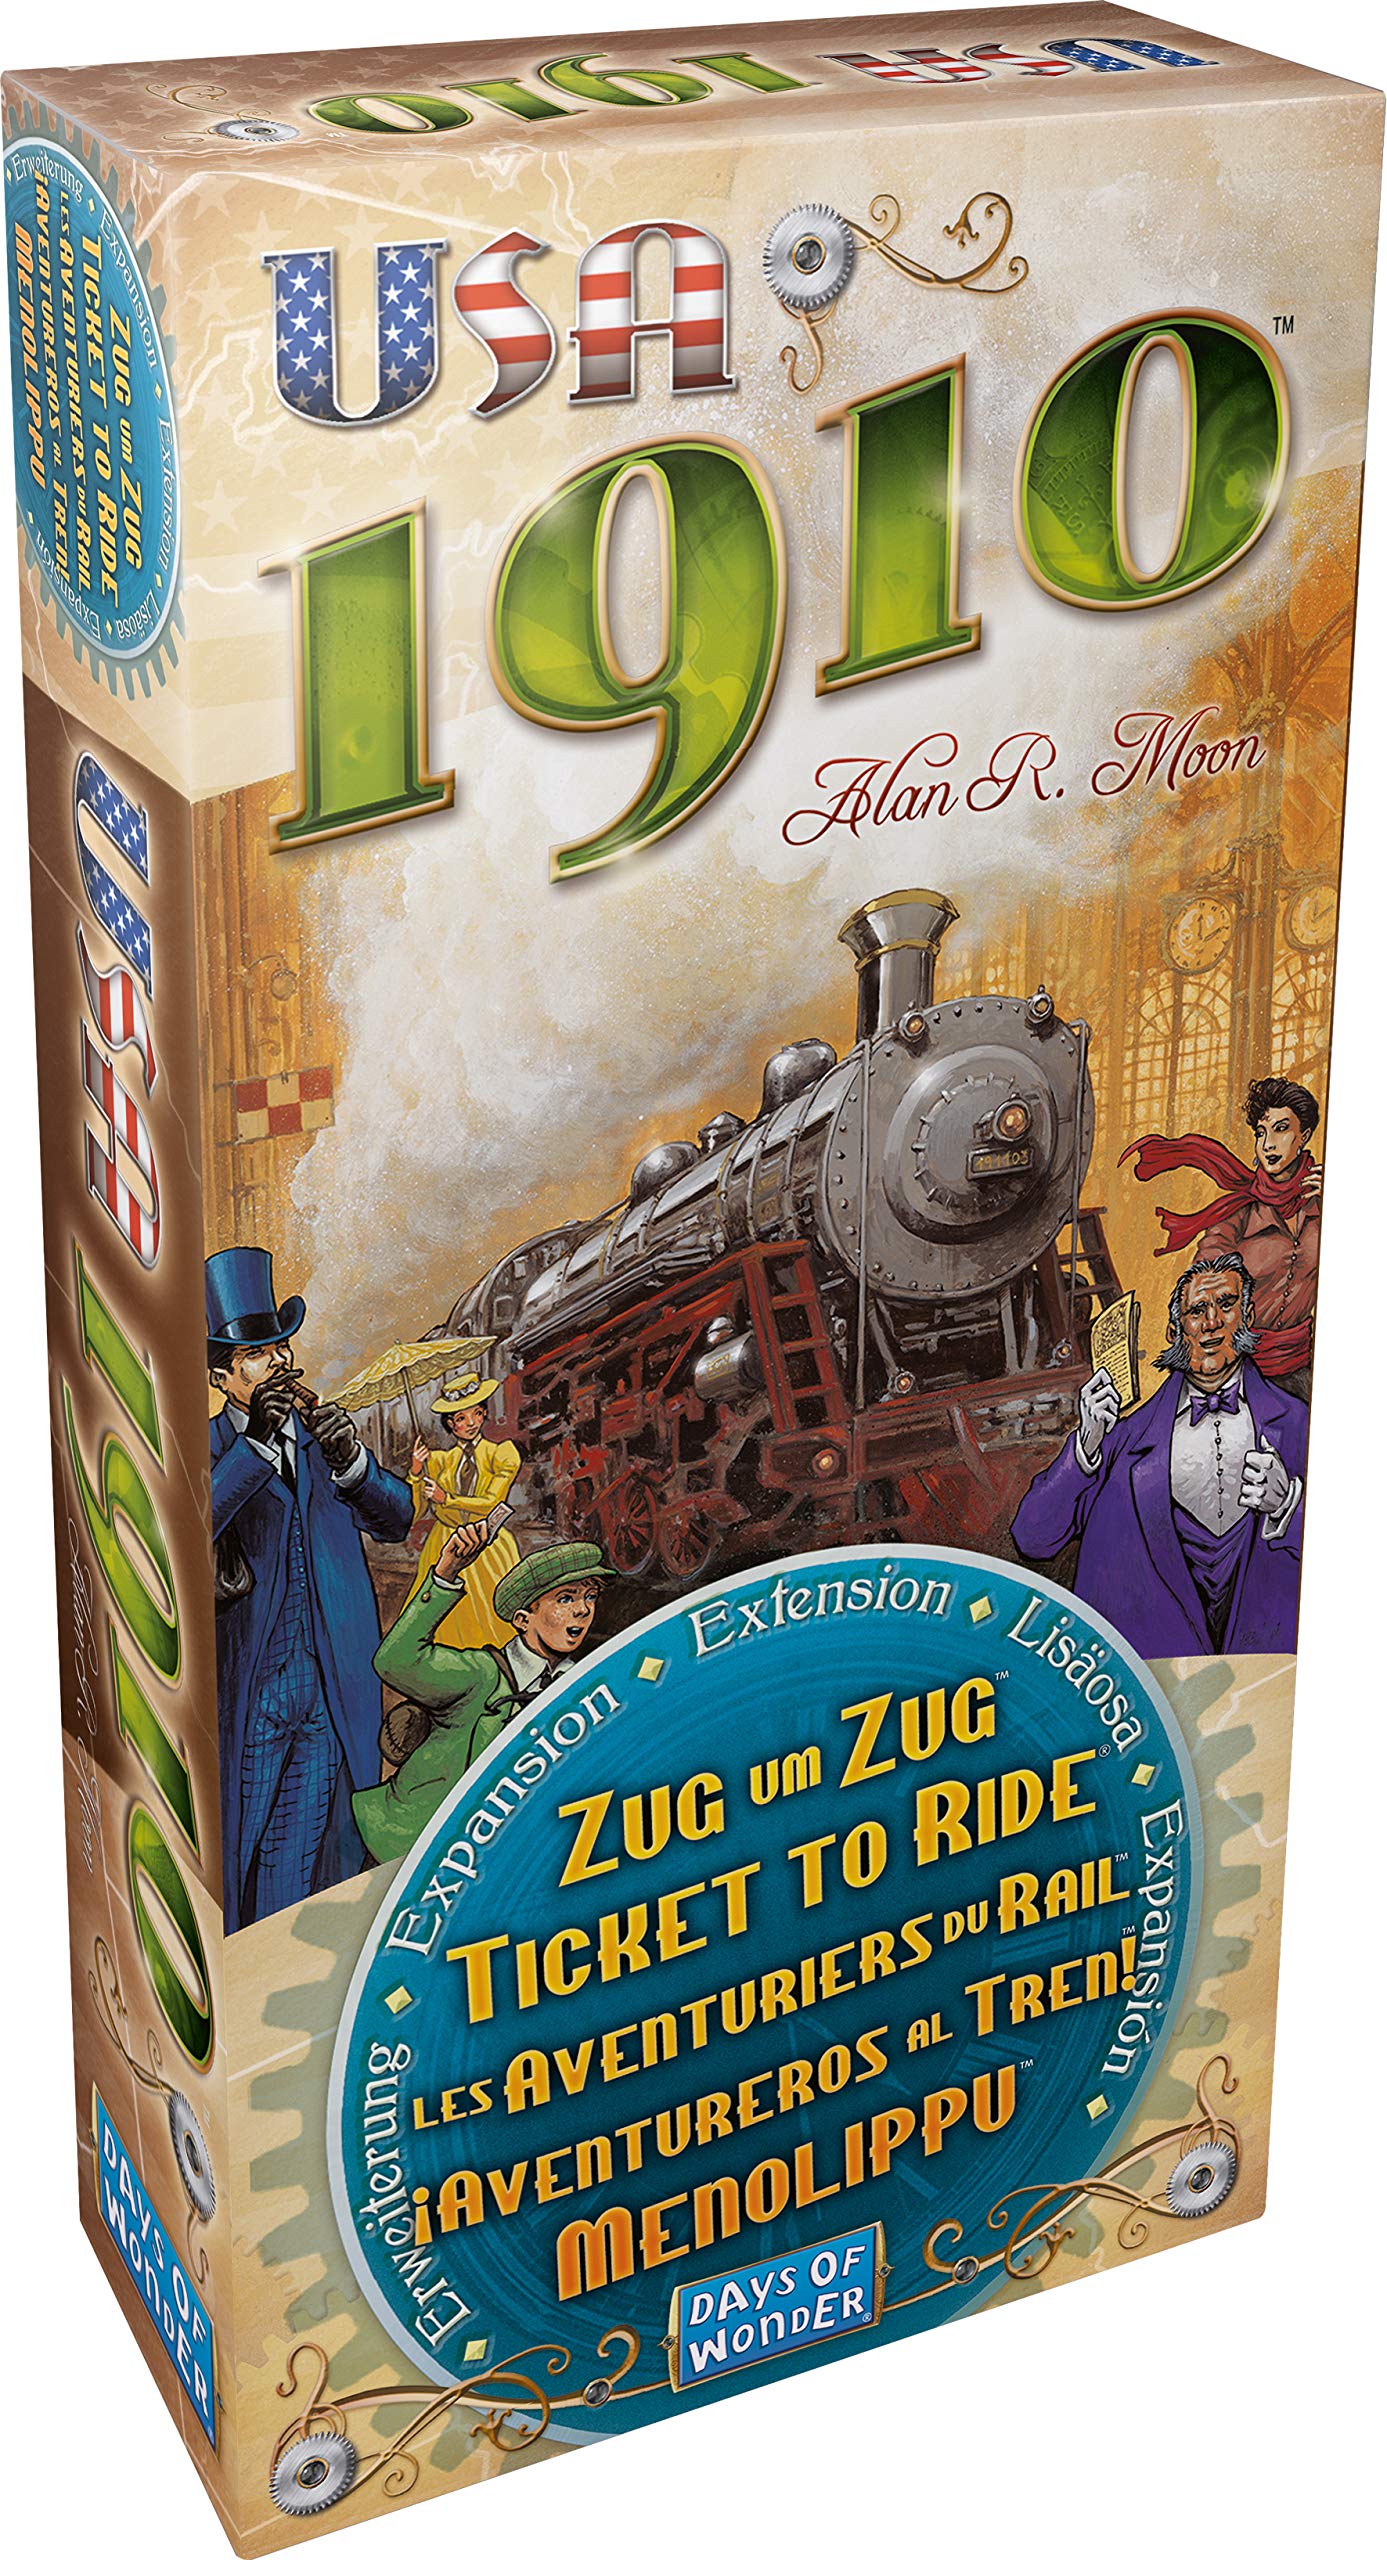 Ticket to Ride: USA 1910 Expansion